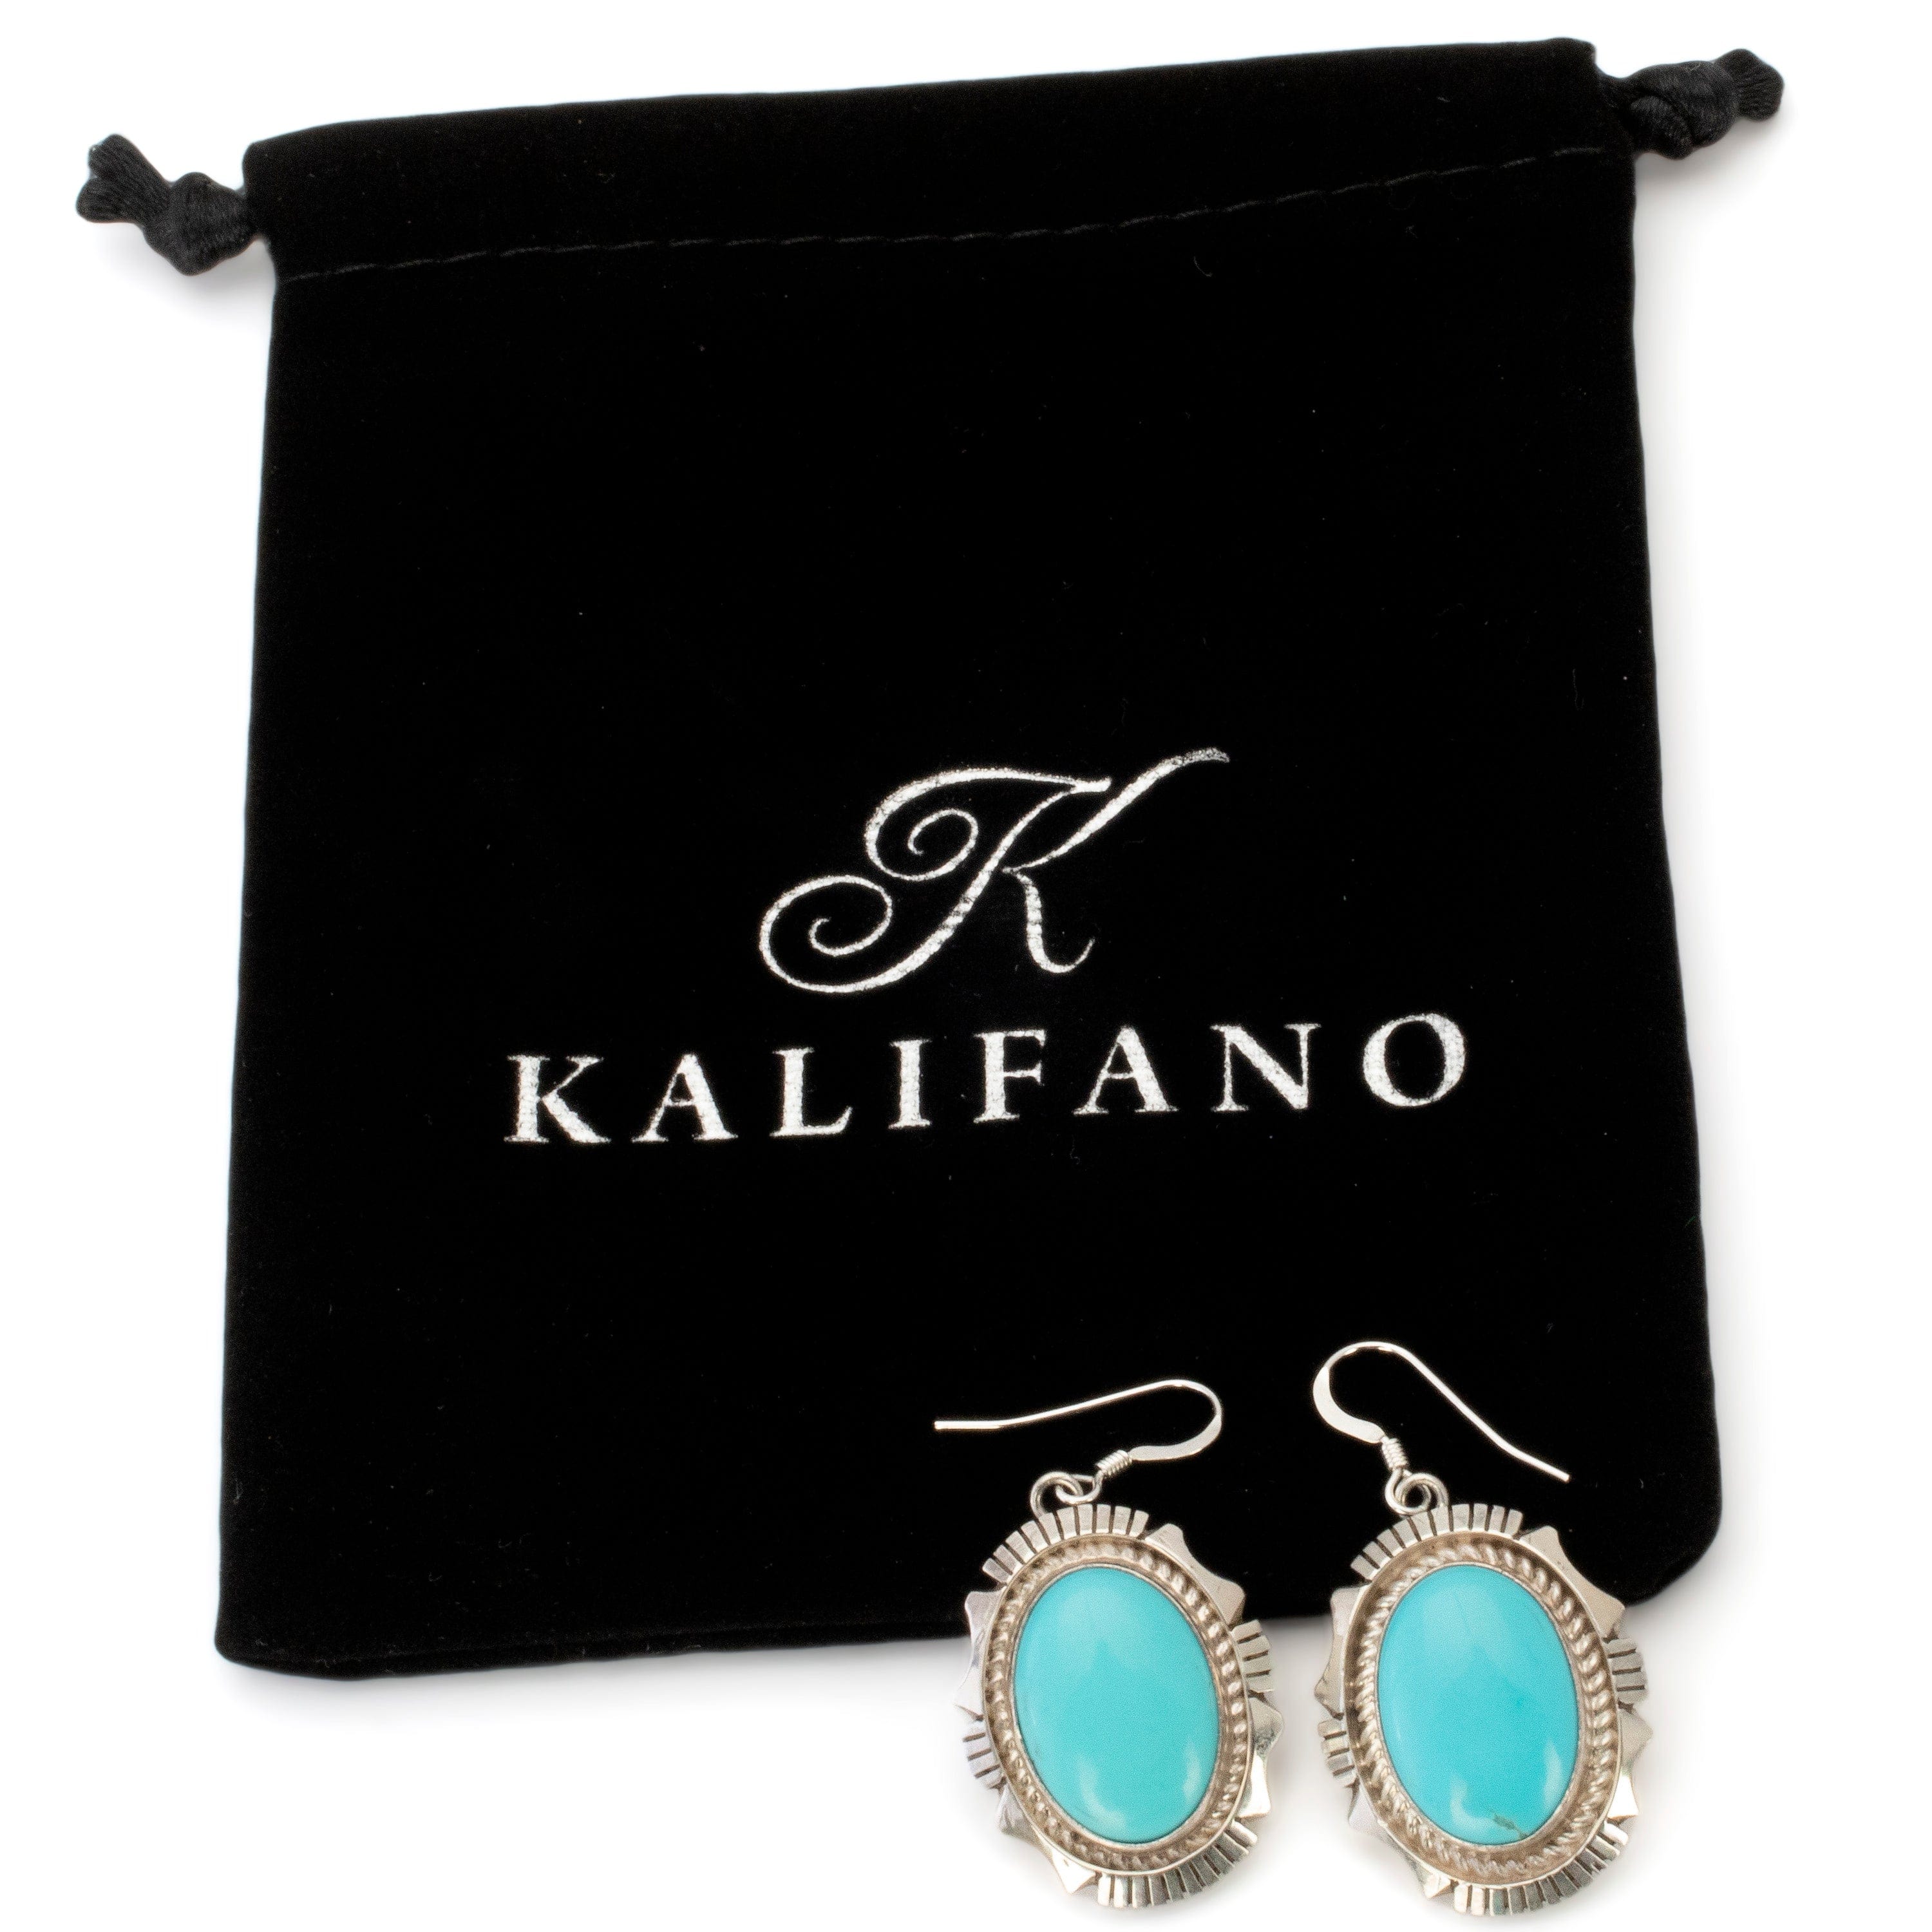 Kalifano Native American Jewelry Eddie Secatero Navajo Kingman Turquoise Round USA Native American Made 925 Sterling Silver Earrings with French Hook NAE300.016